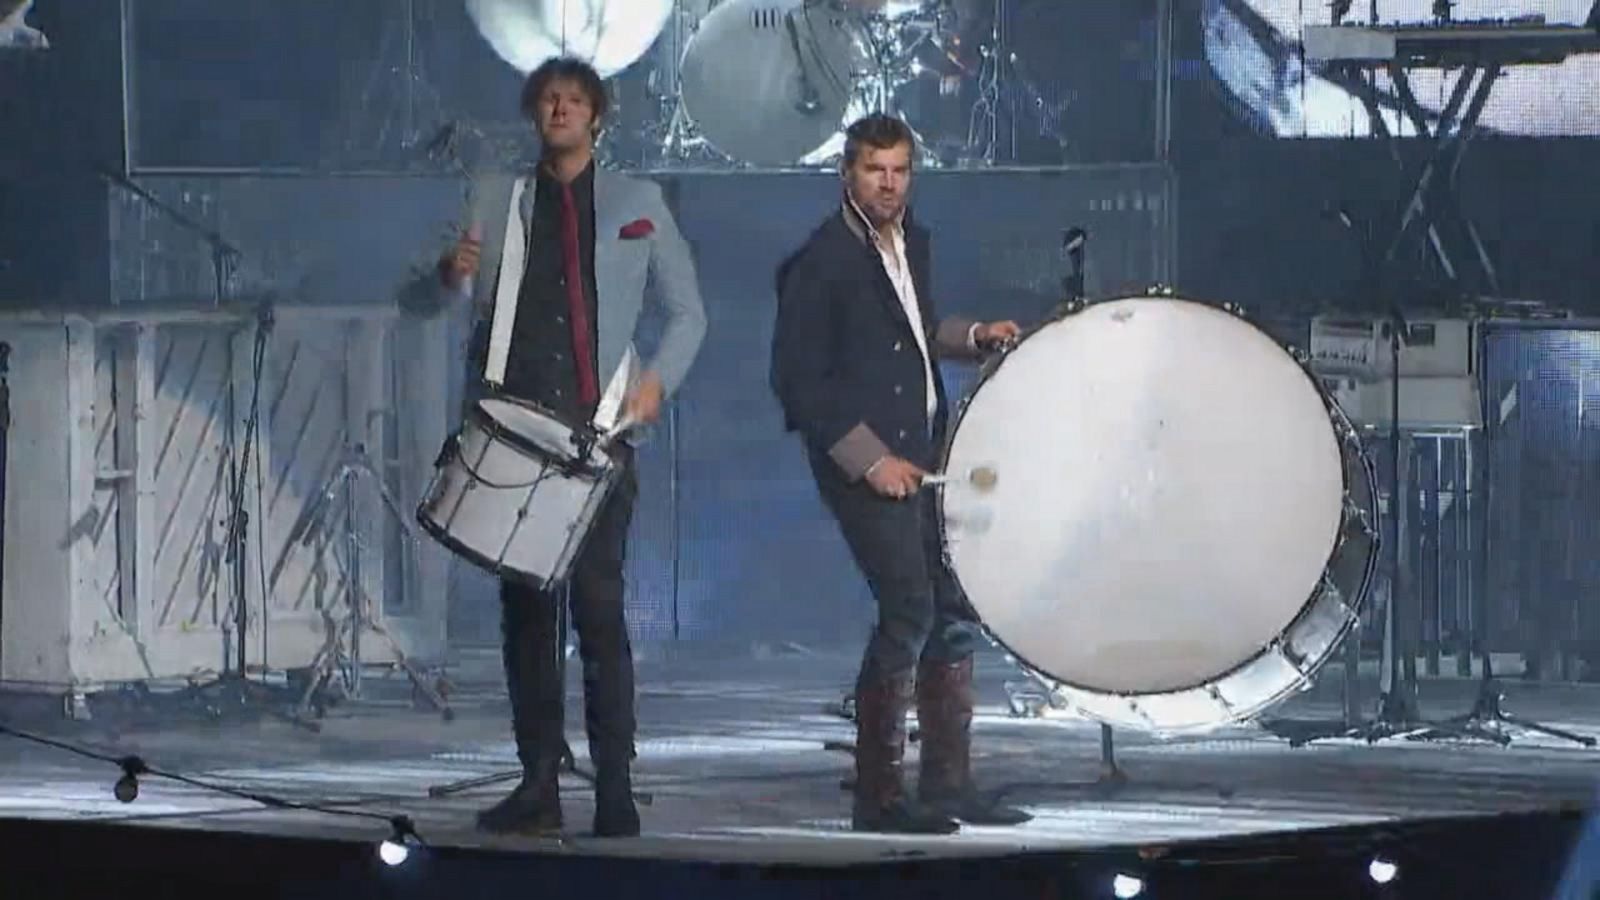 for king and country drummer boy tour setlist